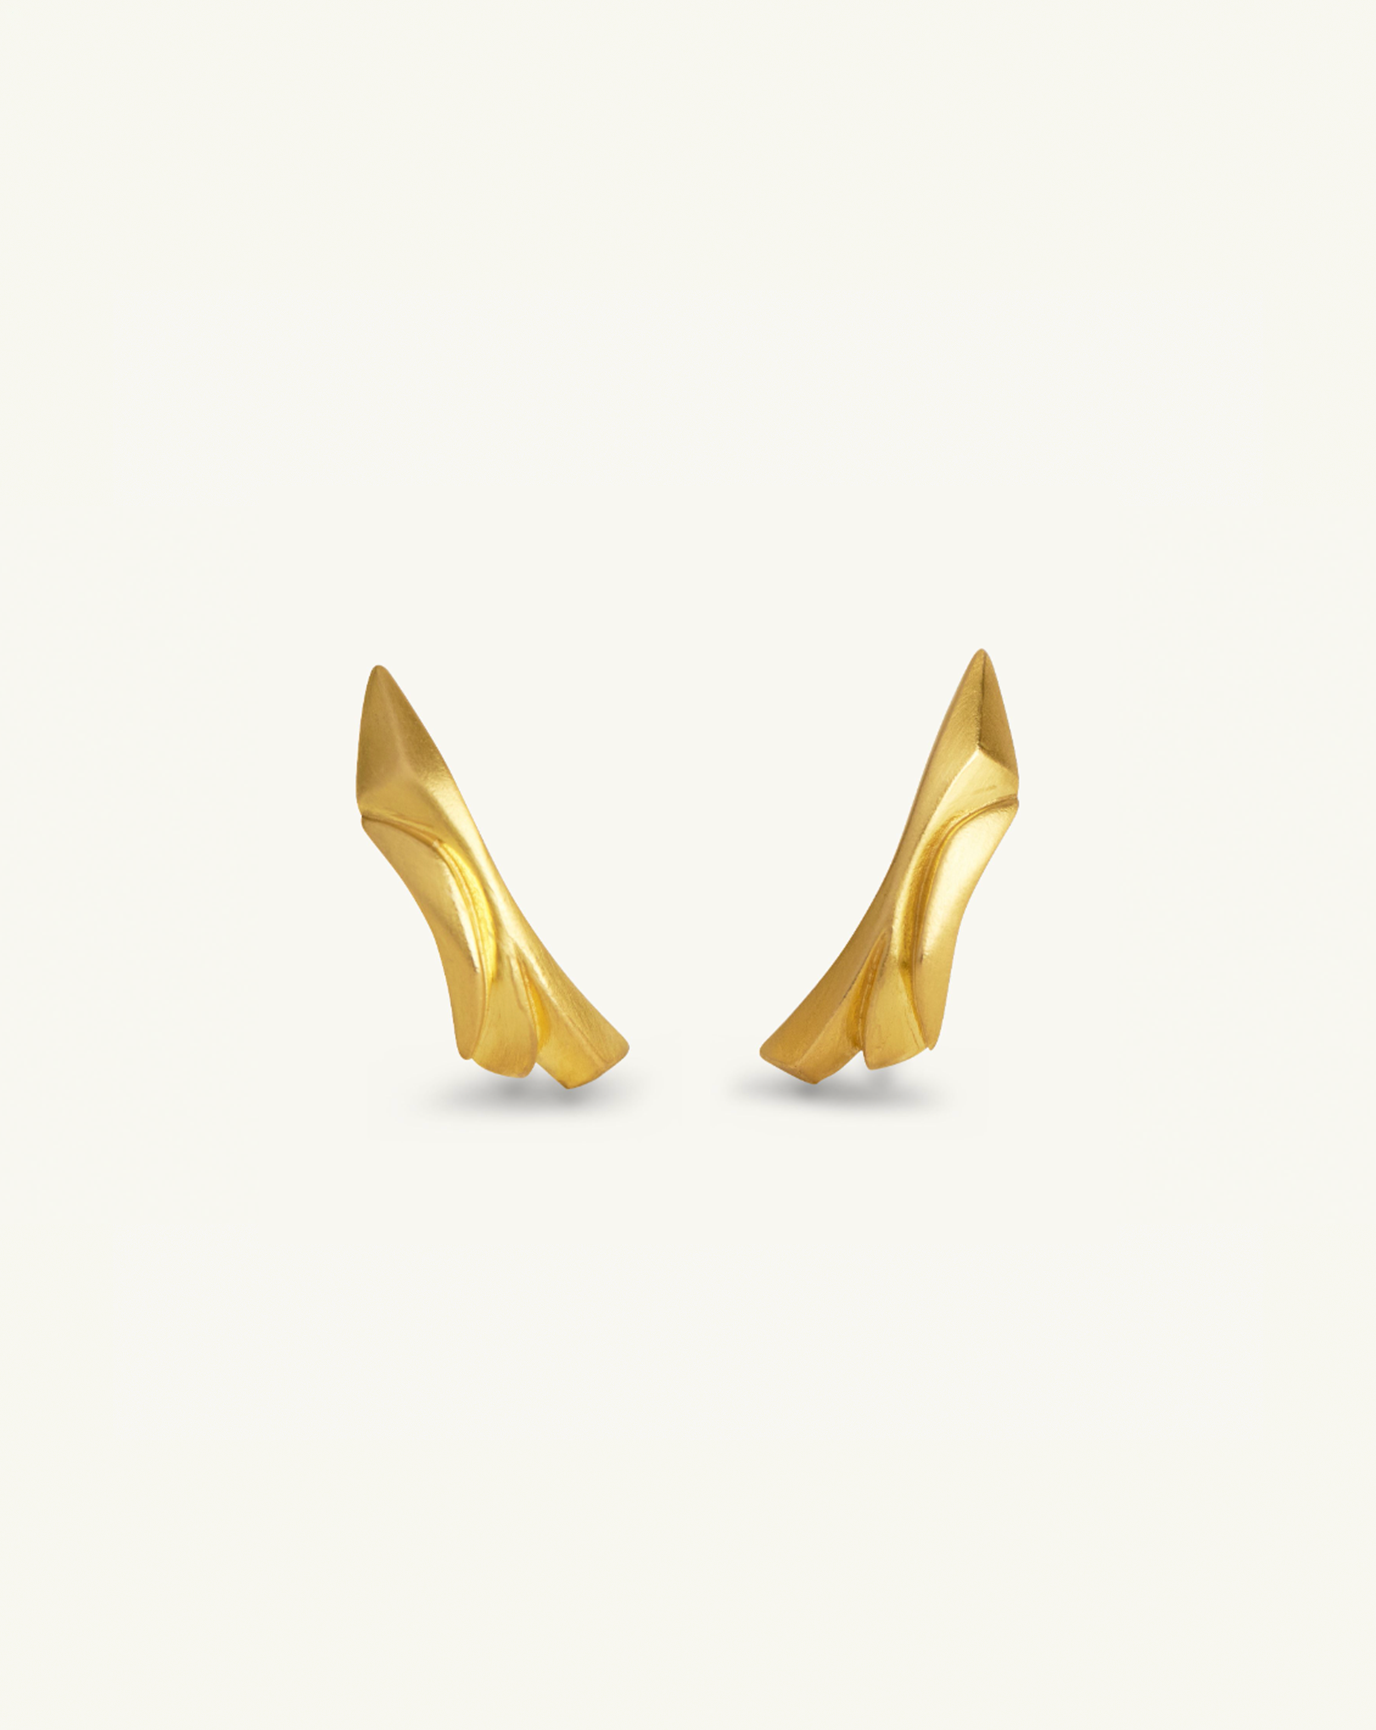 Product image of the sculptural earrings in gold